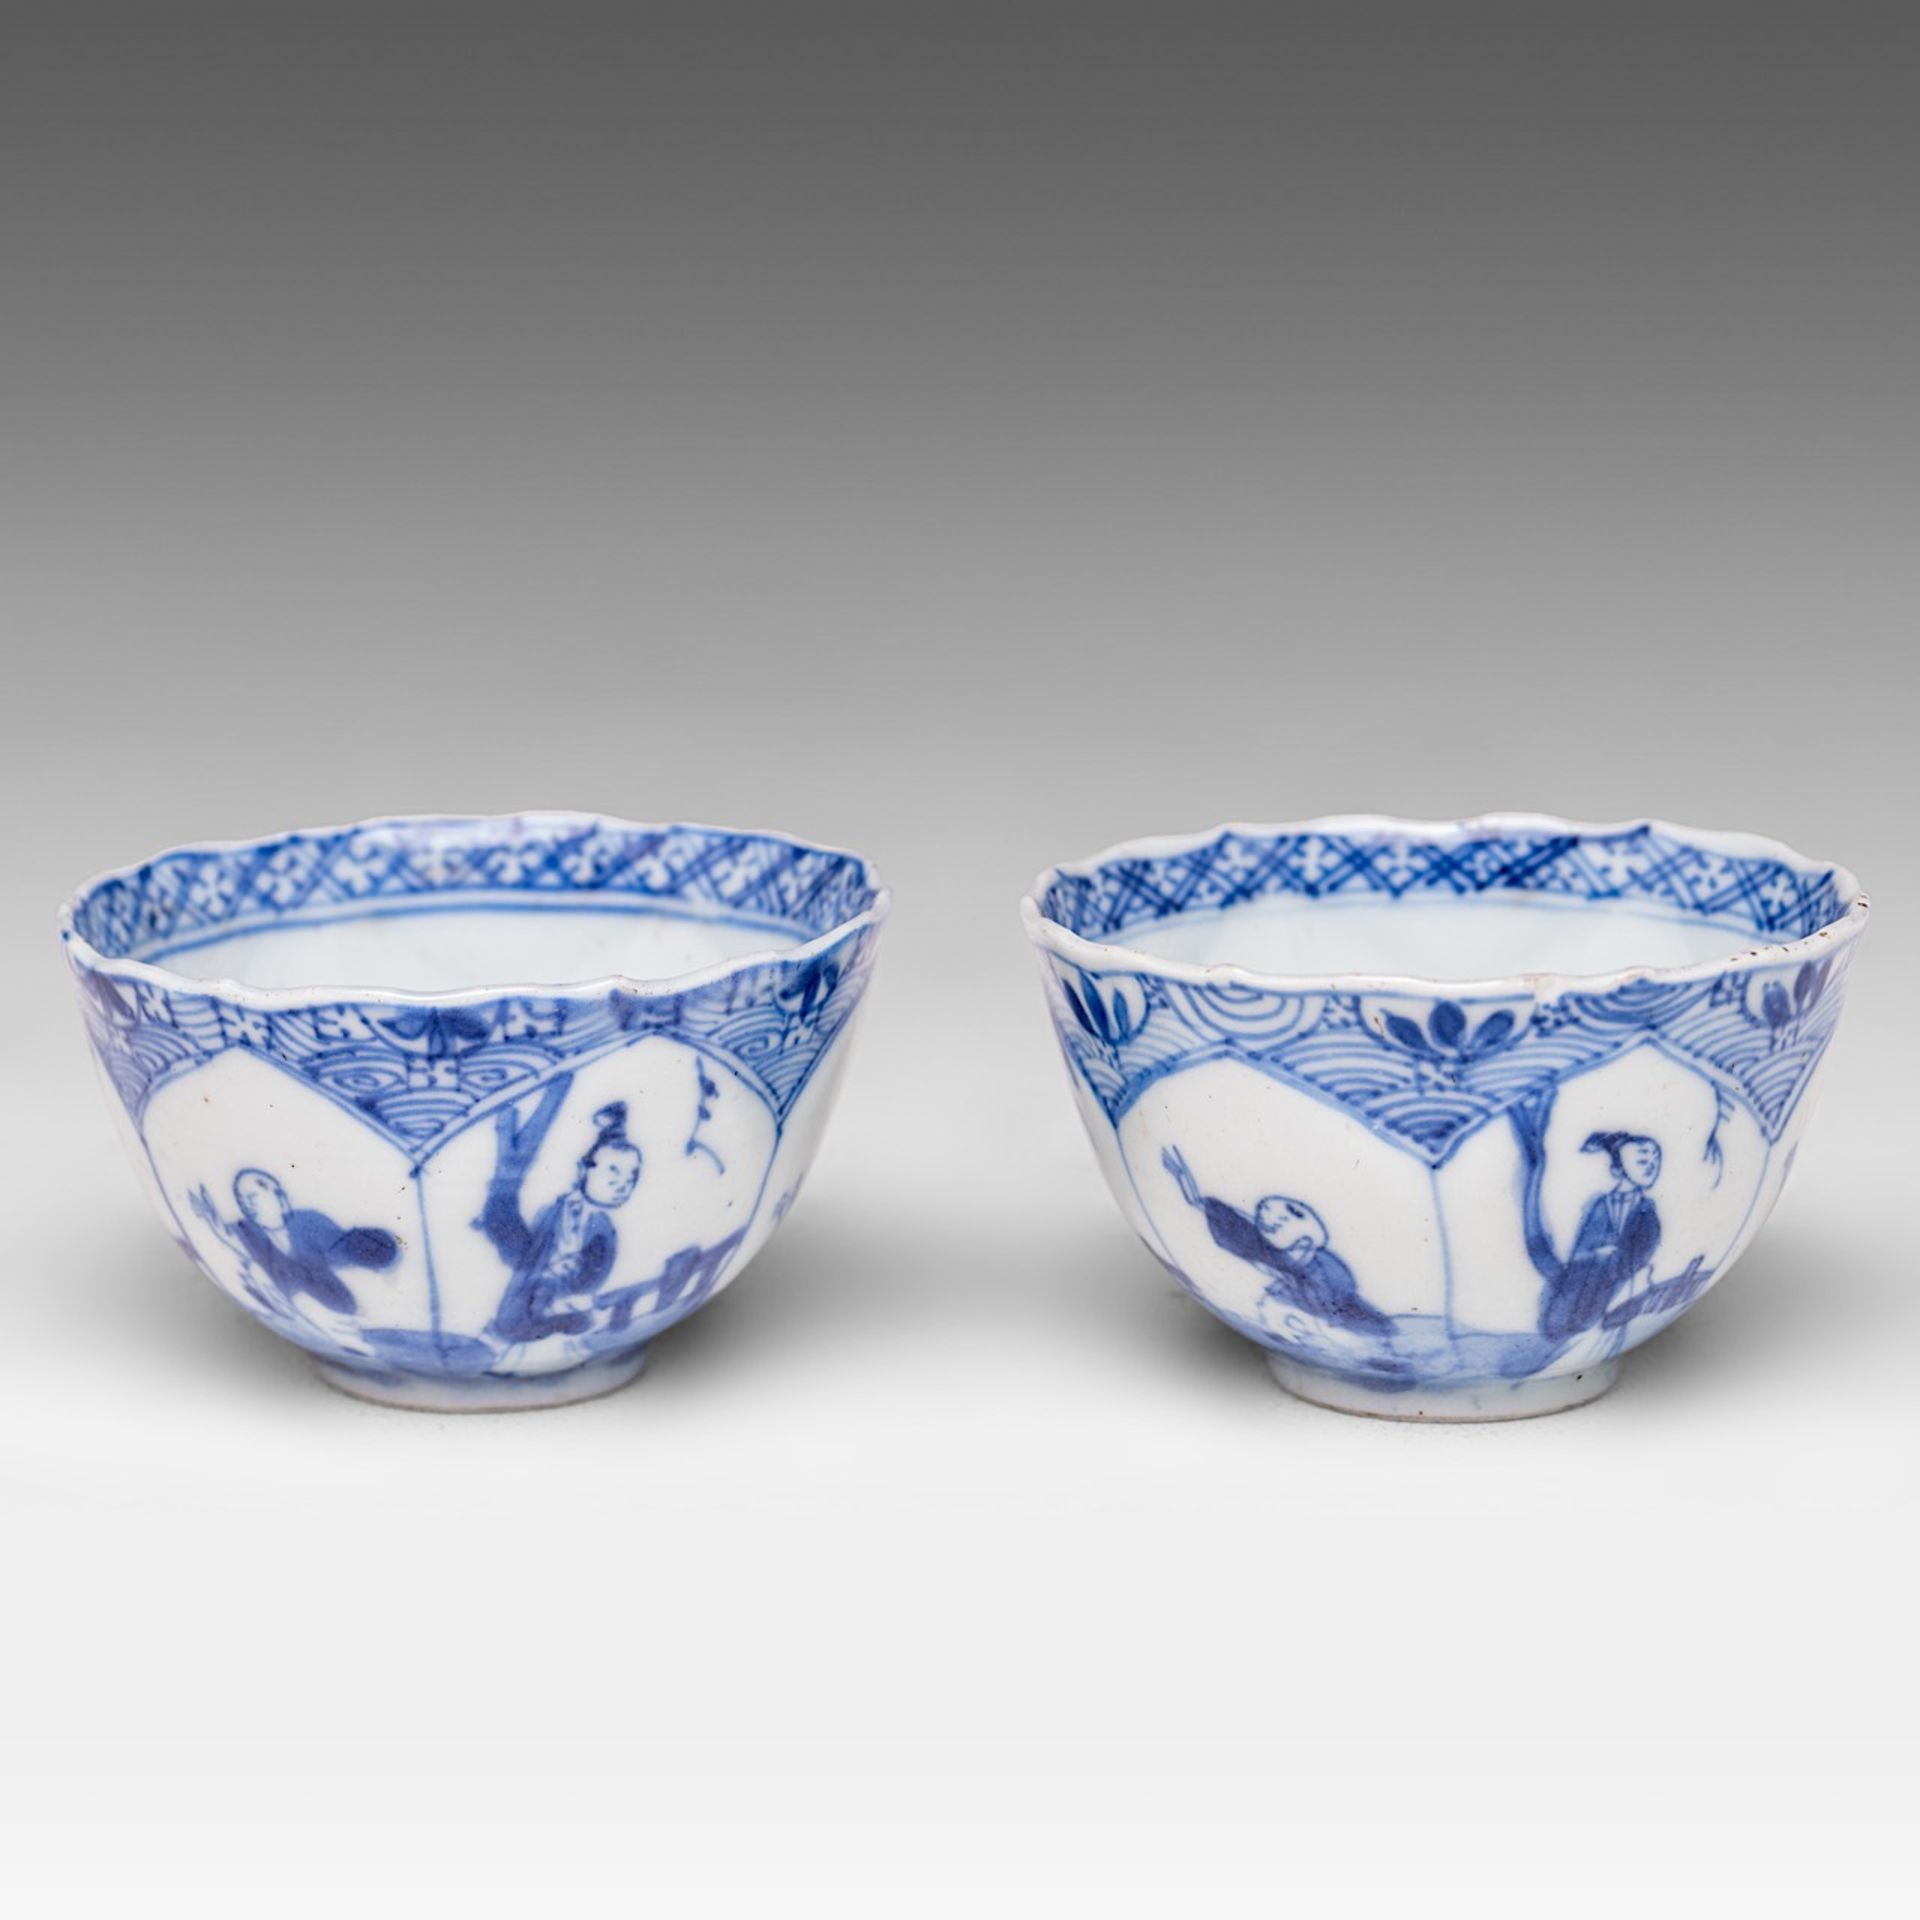 Two Chinese blue and white 'Long Elisa' tea cups, Kangxi period, H - dia cm - Image 2 of 6